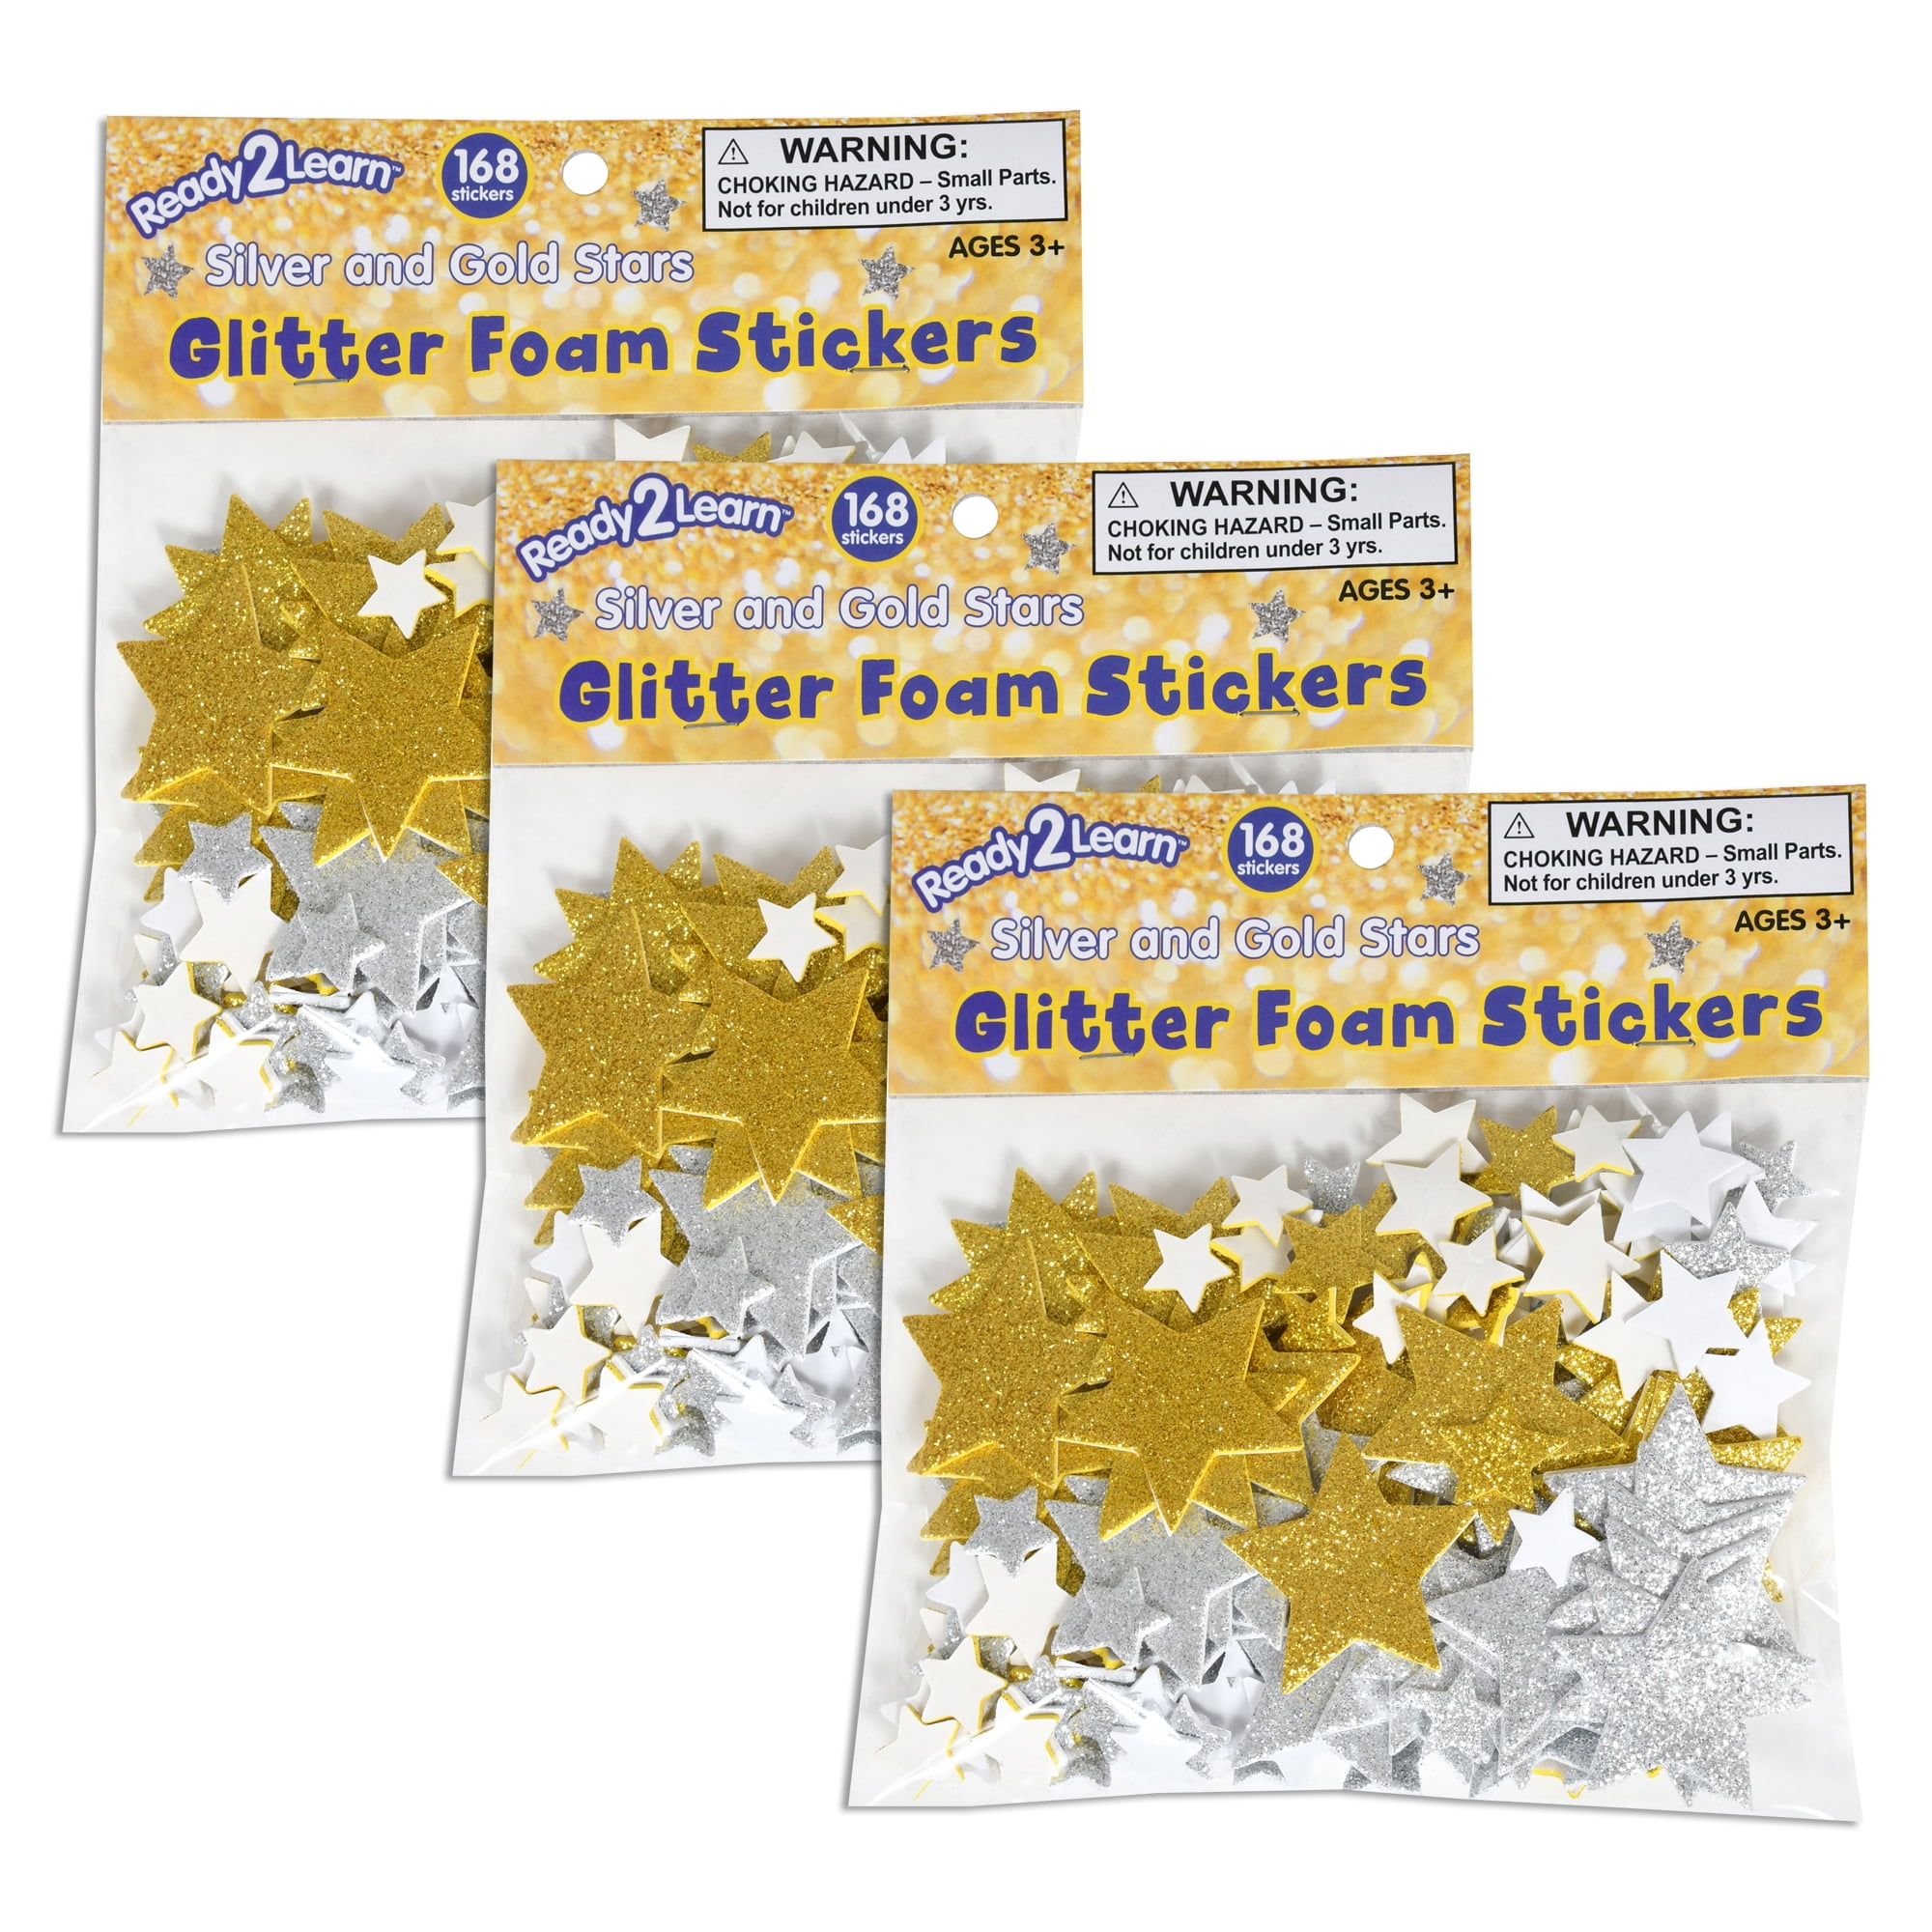 READY 2 LEARN Glitter and Foam Stickers - Stacking Flowers - Pack of 144-6  Colors - 24 Shapes - Kids Self-Adhesive Stickers - Cards, Laptops, Crafts